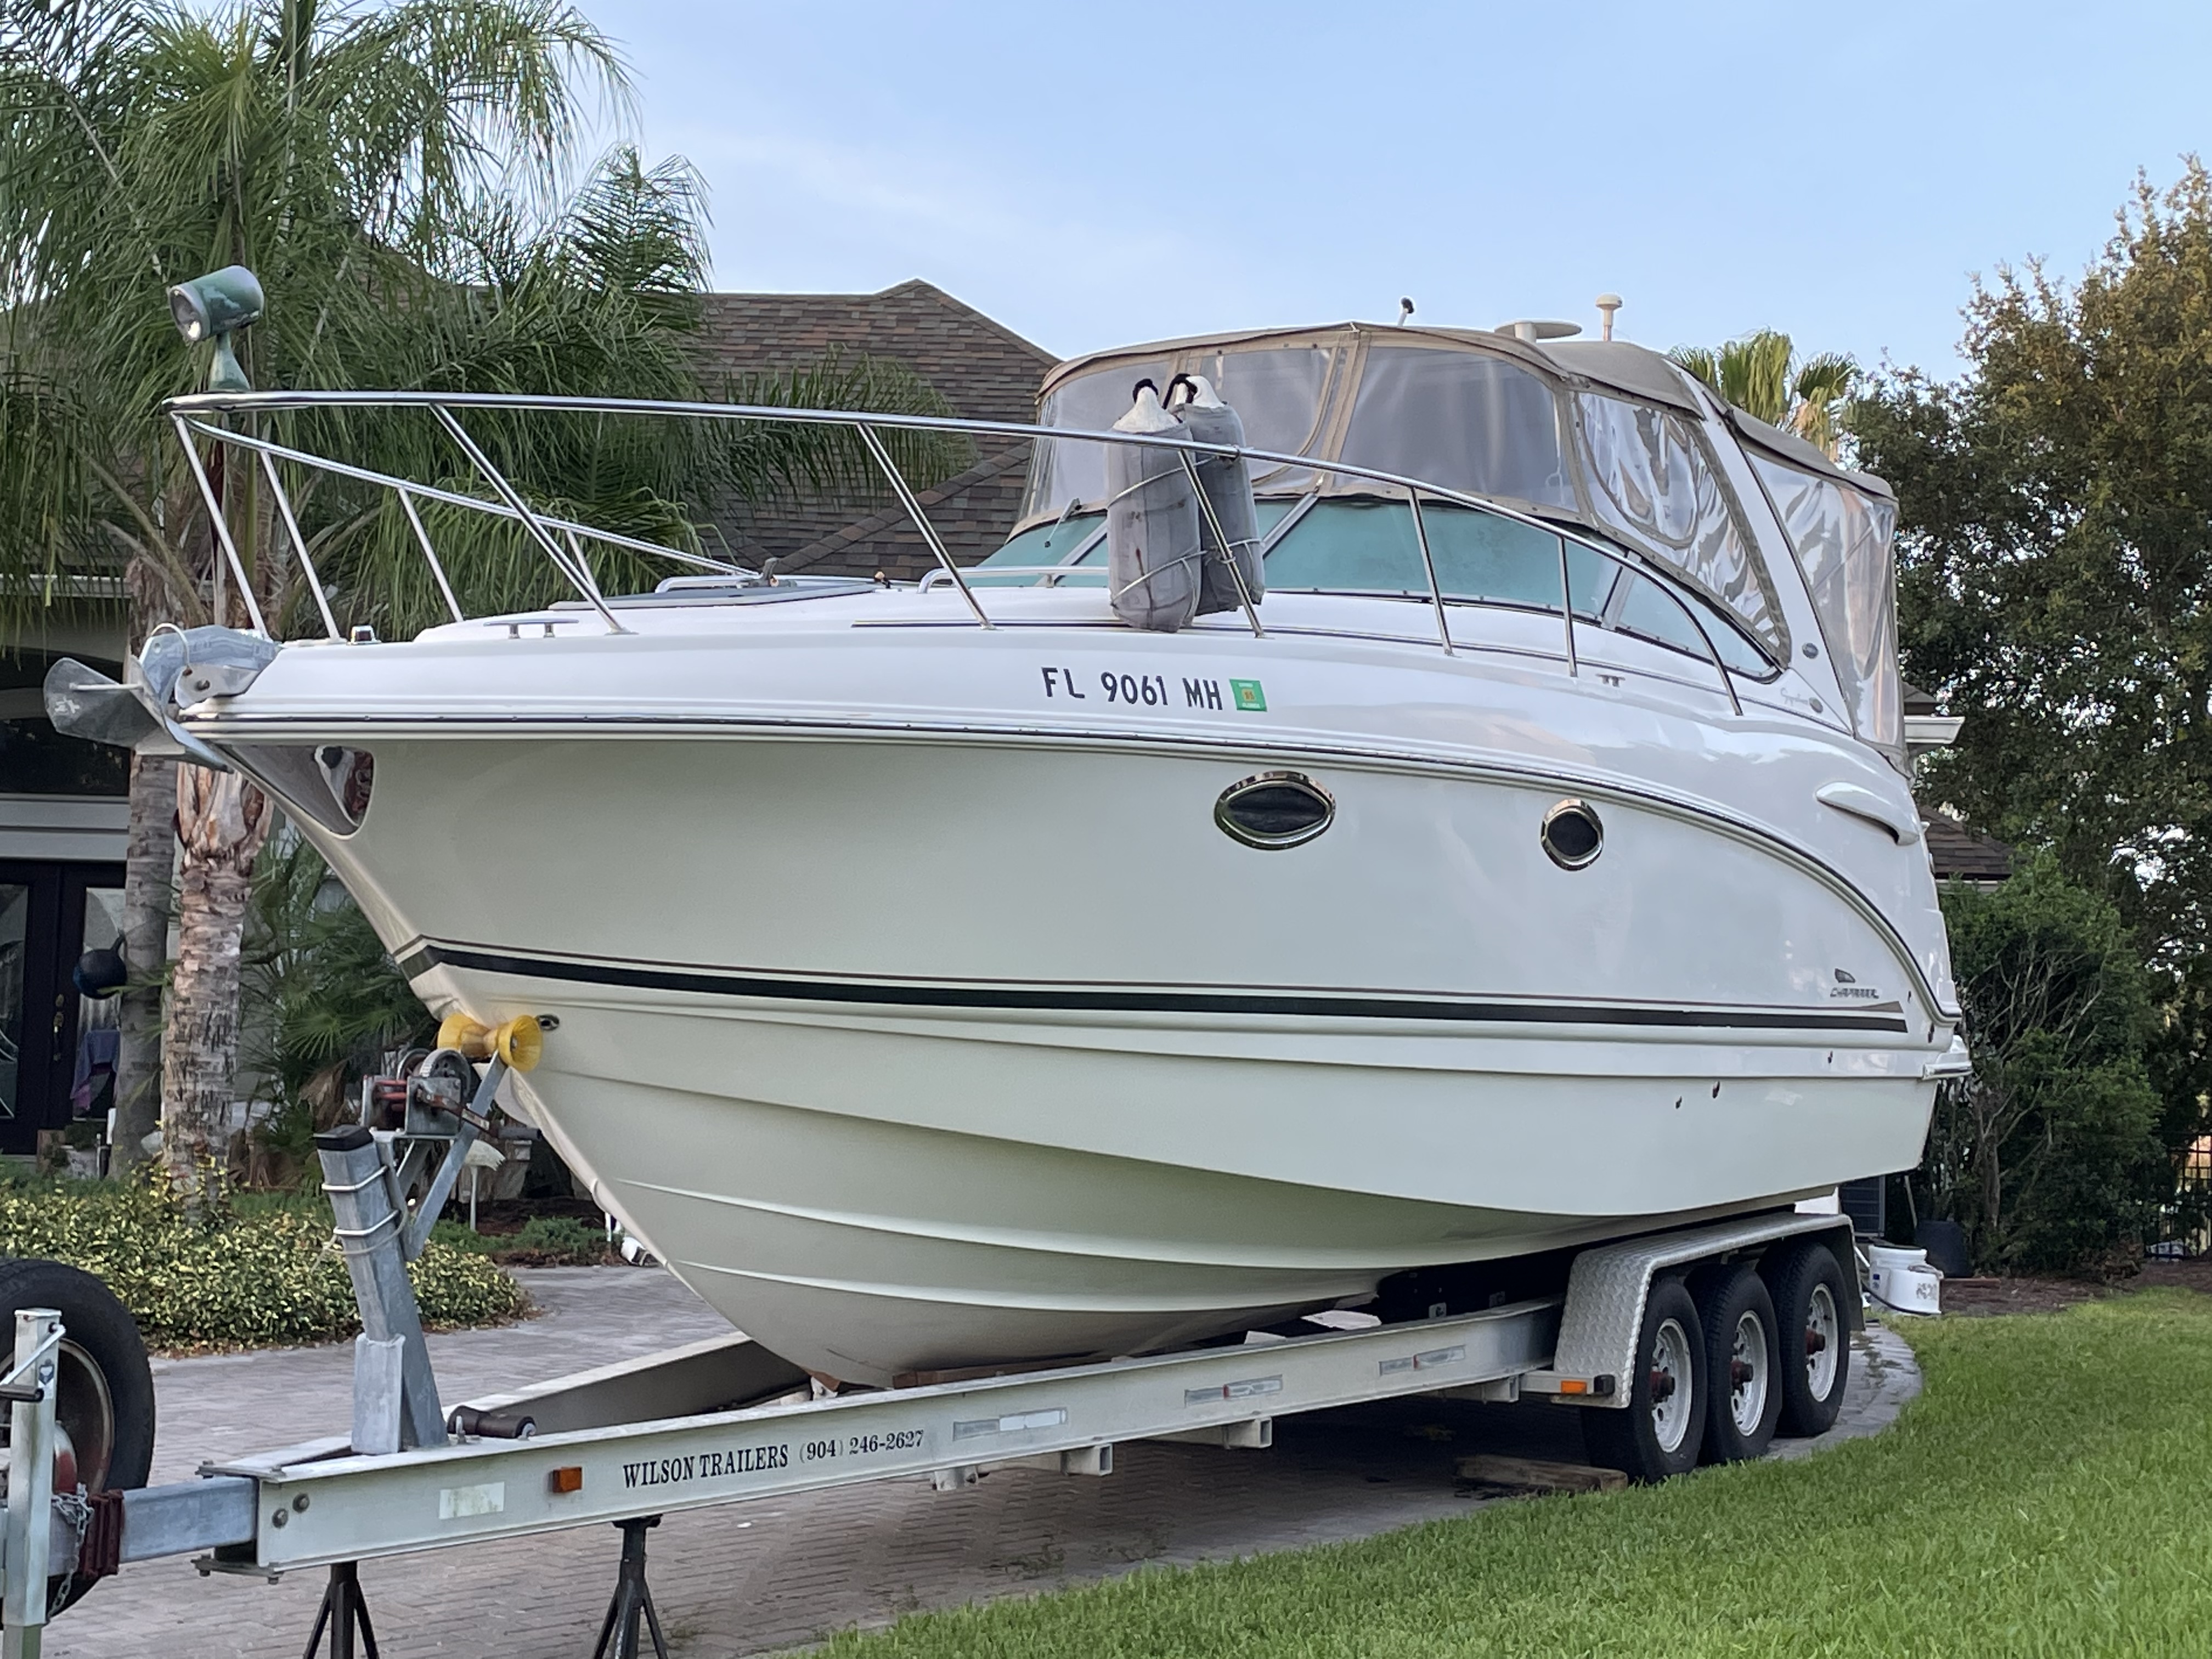 2003 Chaparral Signature 280 Power boat for sale in Jacksonville, FL - image 2 